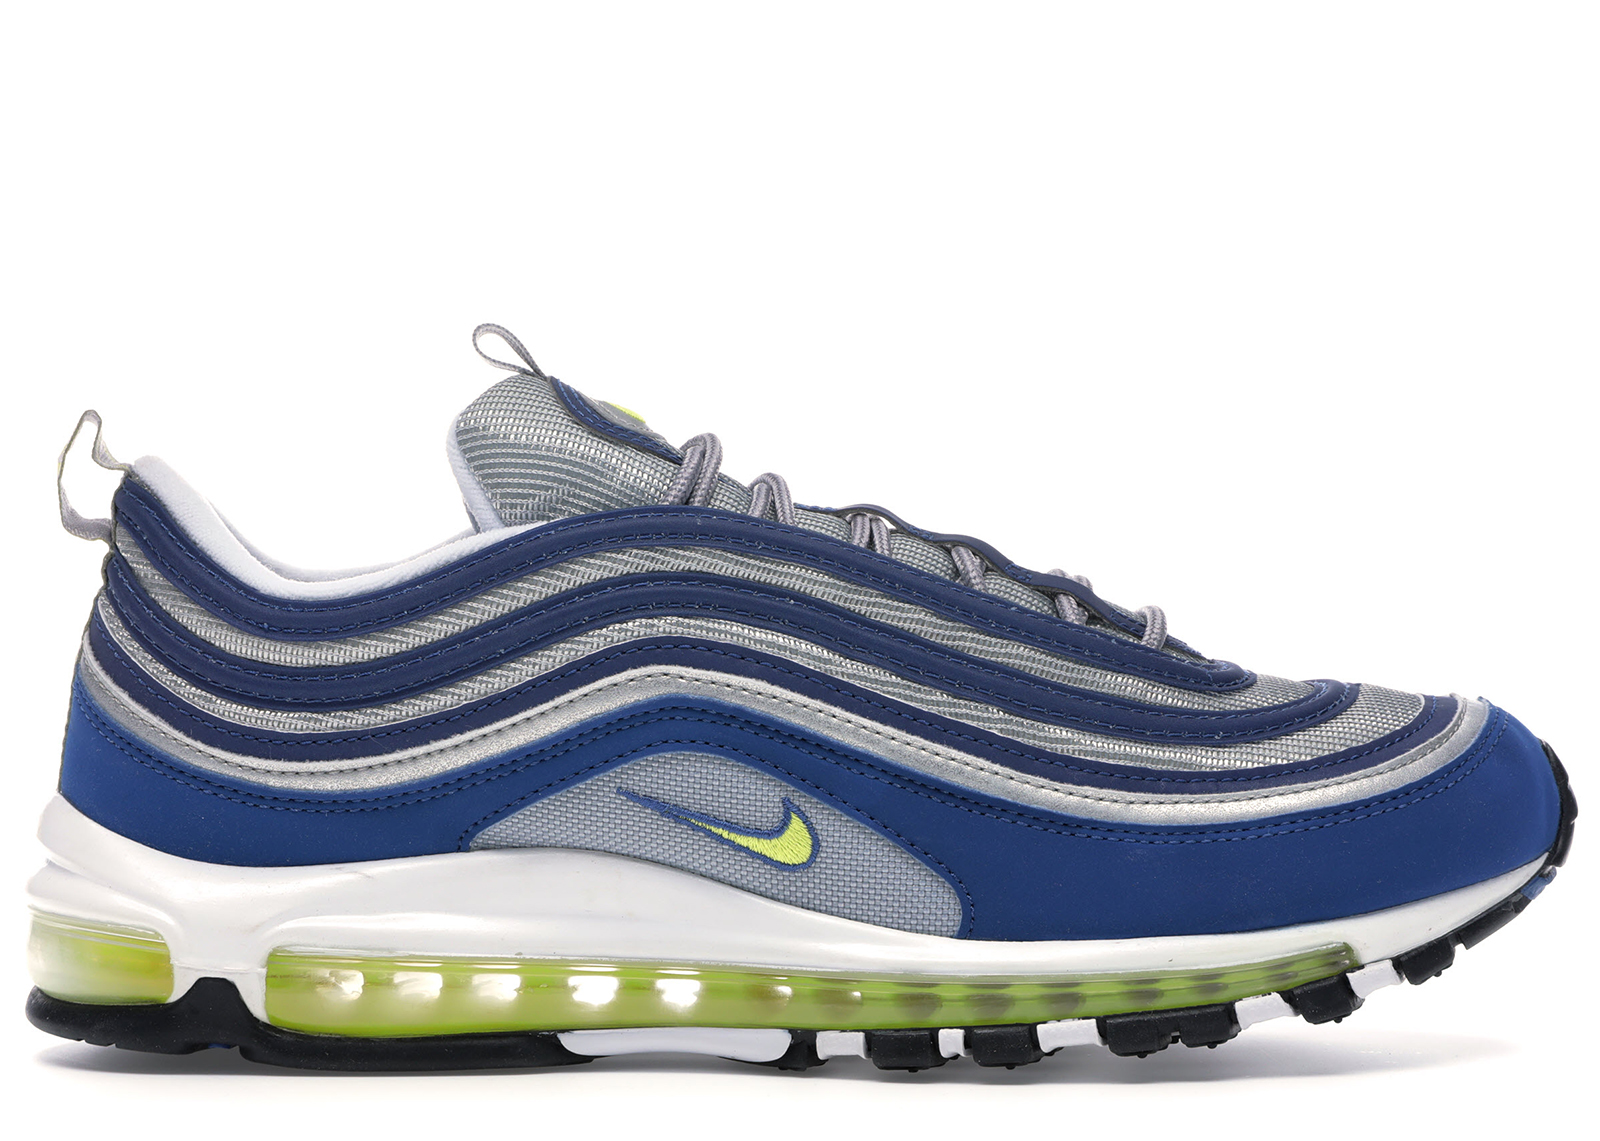 nike air max 97 blue red yellow